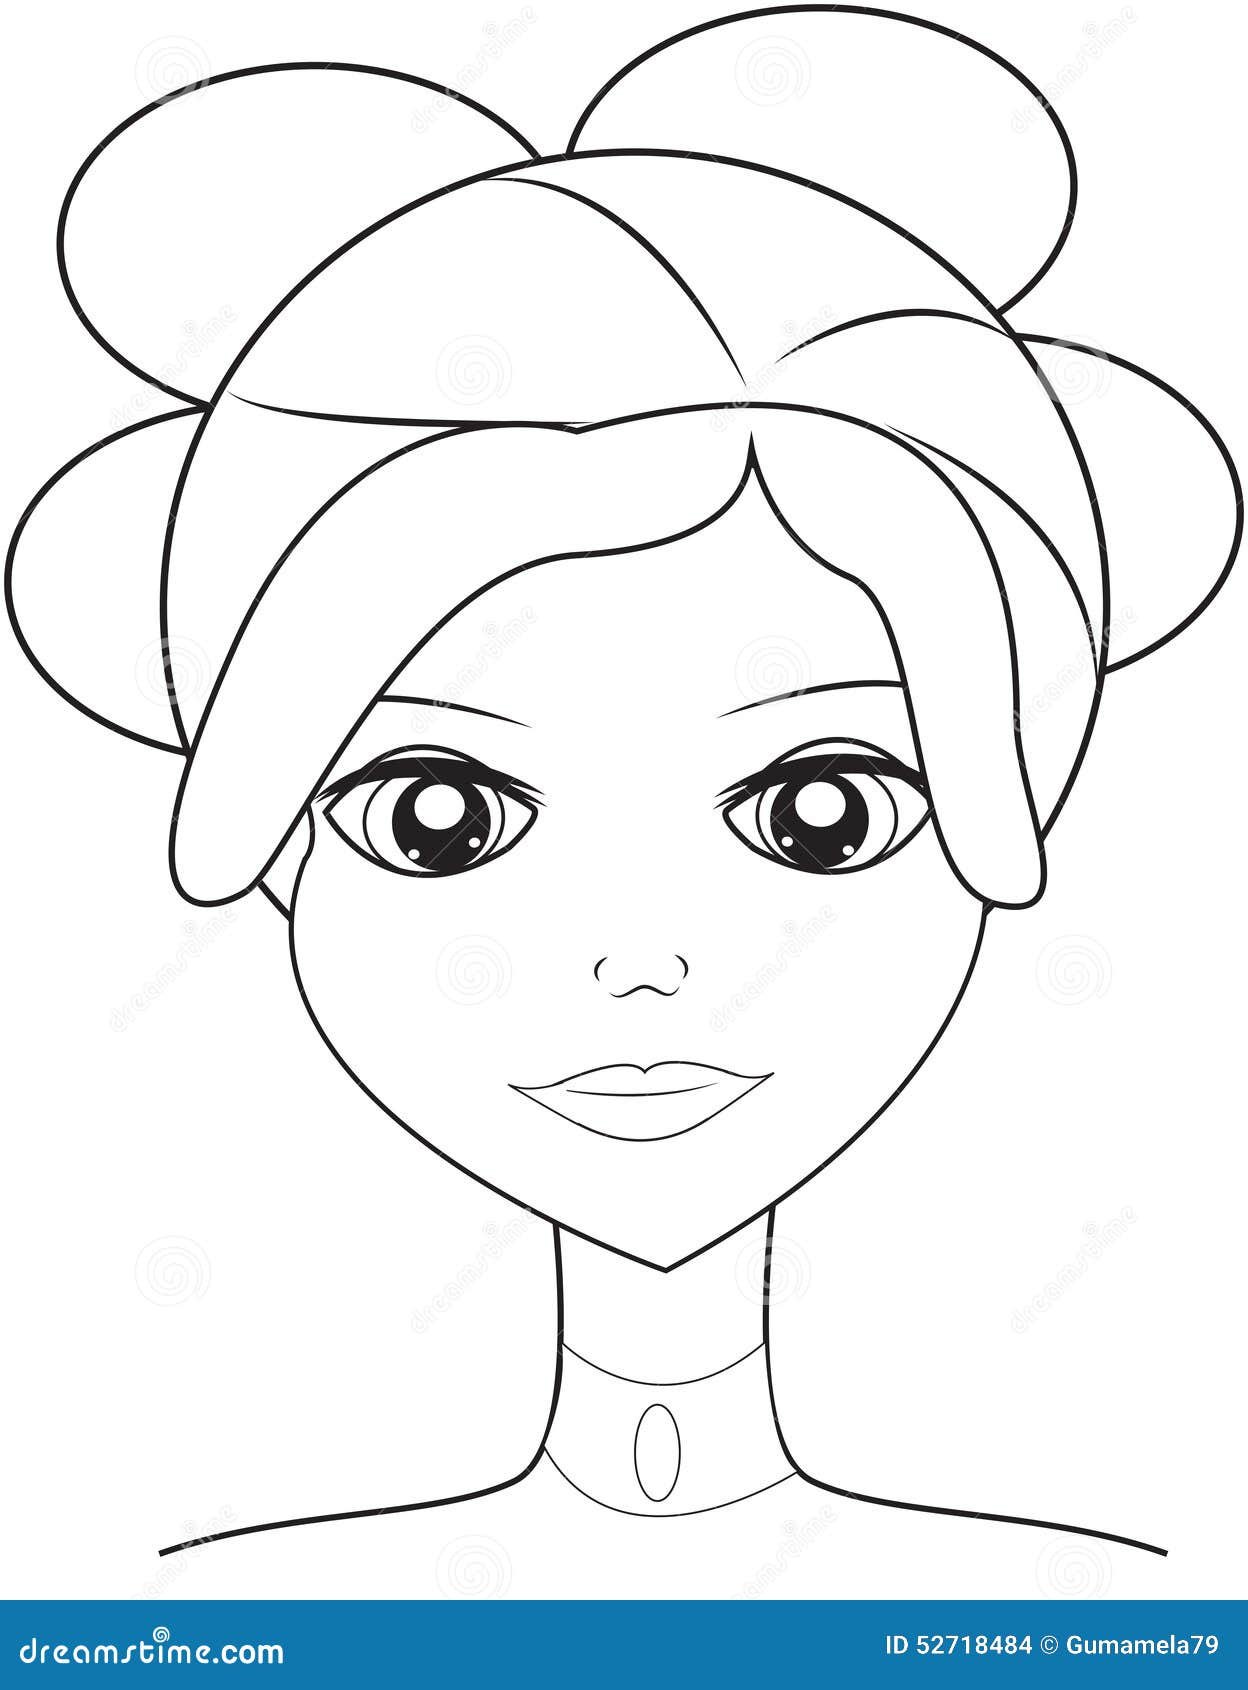 Lady s face coloring page stock illustration. Illustration ...